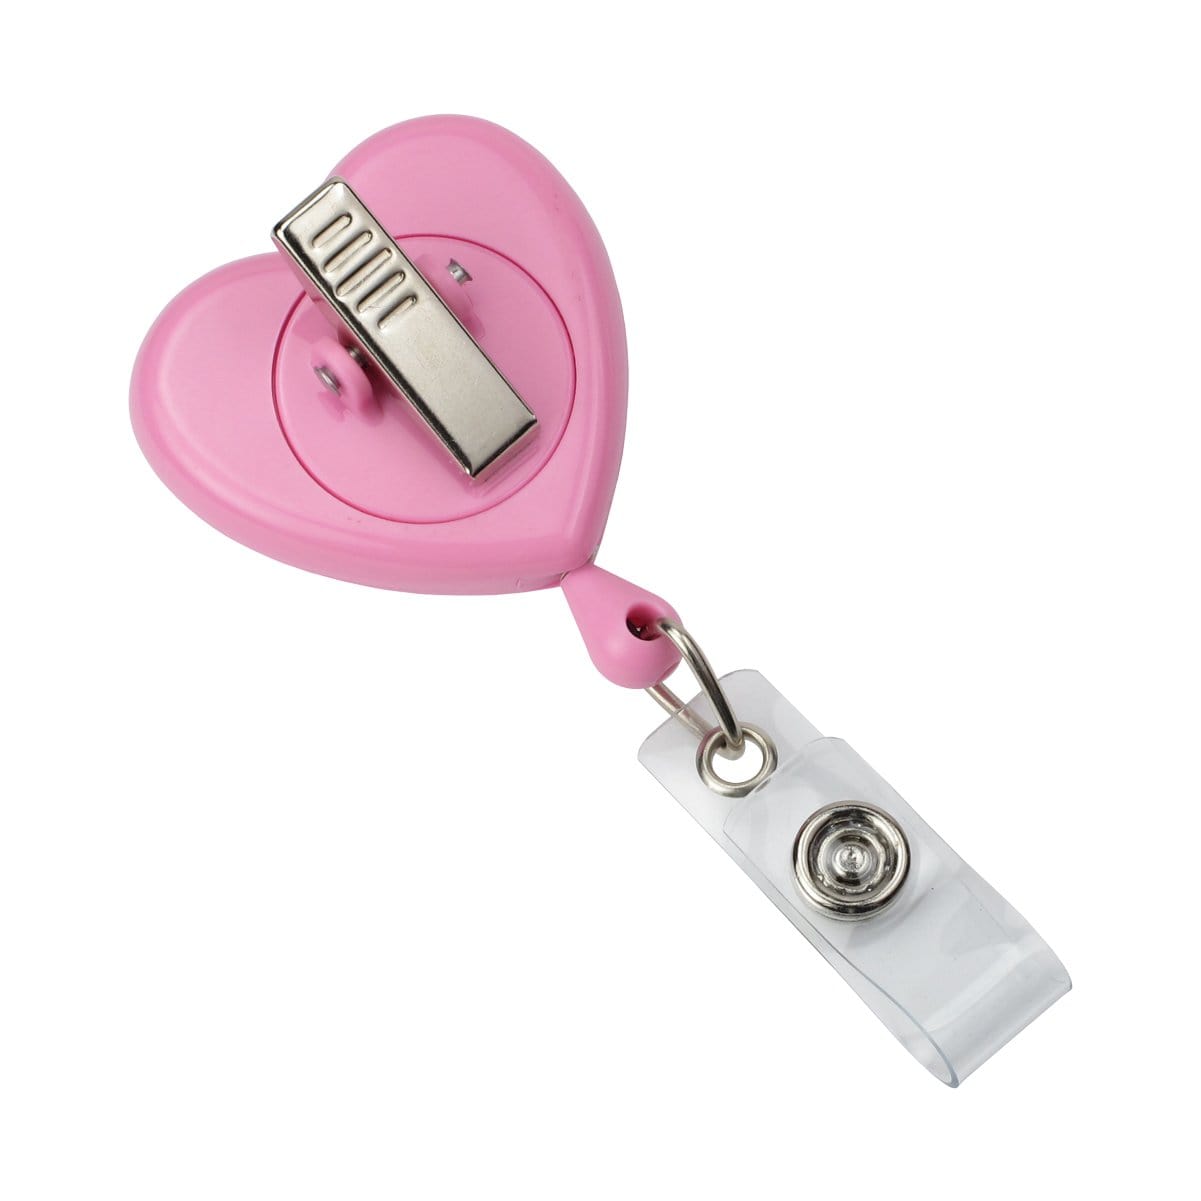 Heart Shaped Ribbon Awareness Badge Reel with Swivel Spring Clip (p/n 2120-7630)